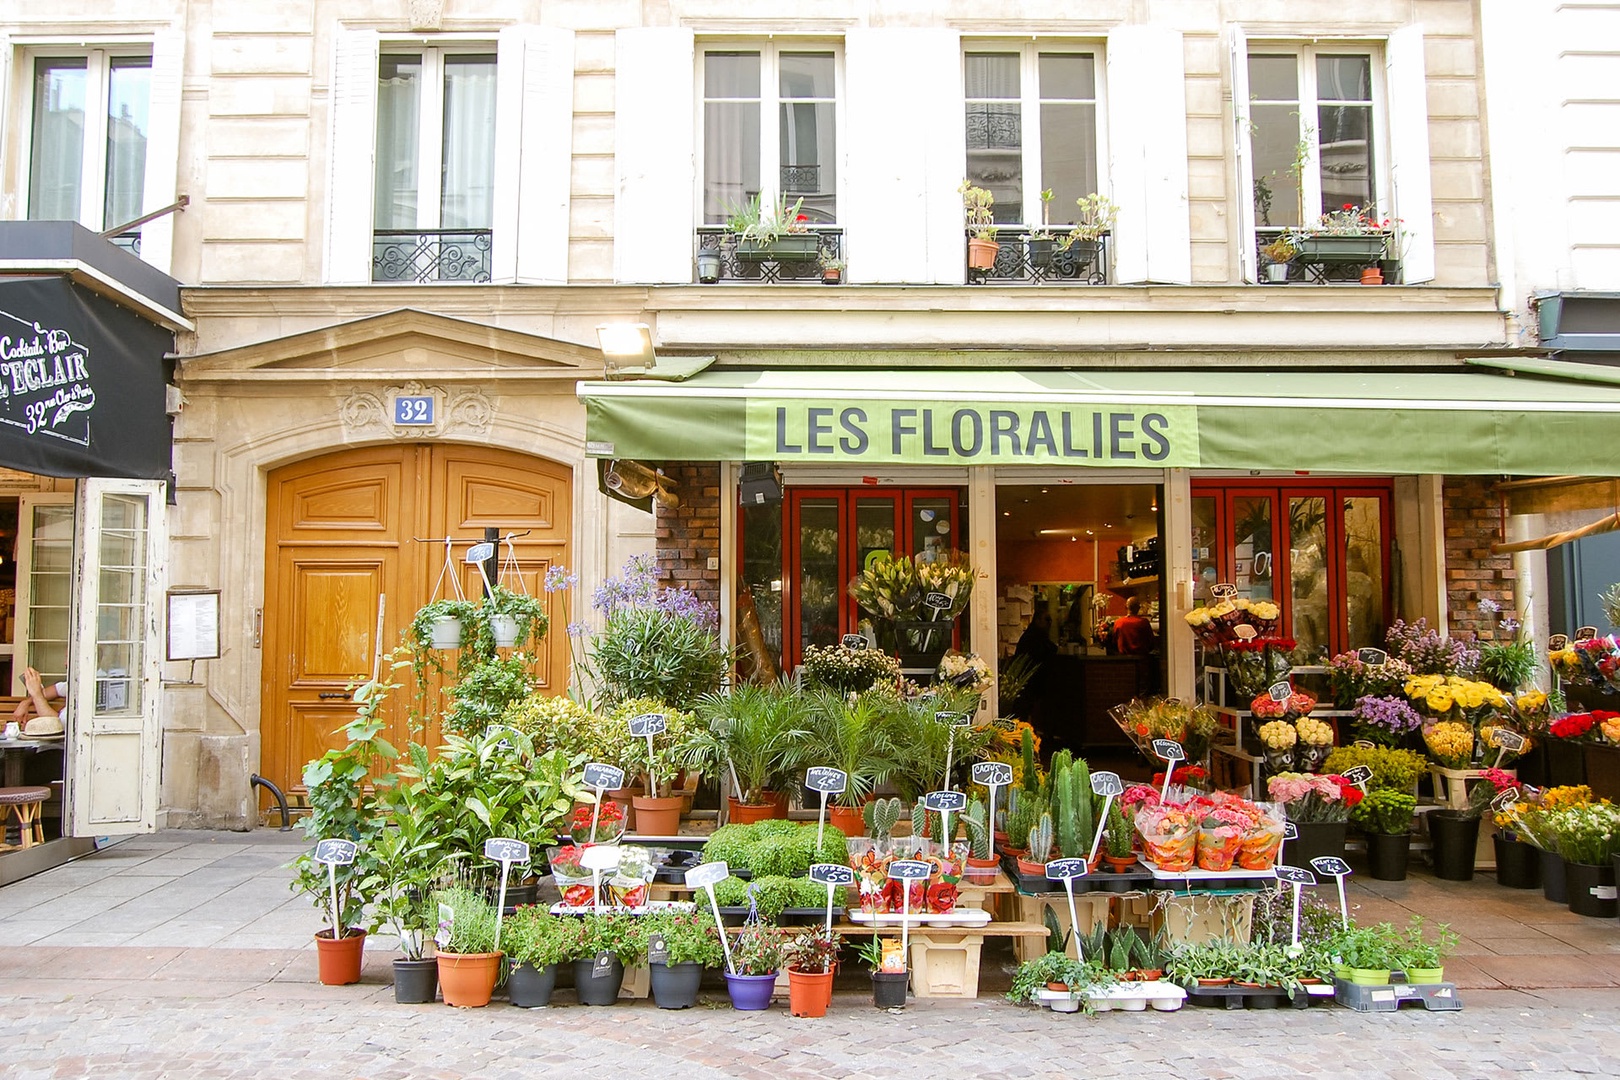 Find beautiful rue Cler market street right outside your door!